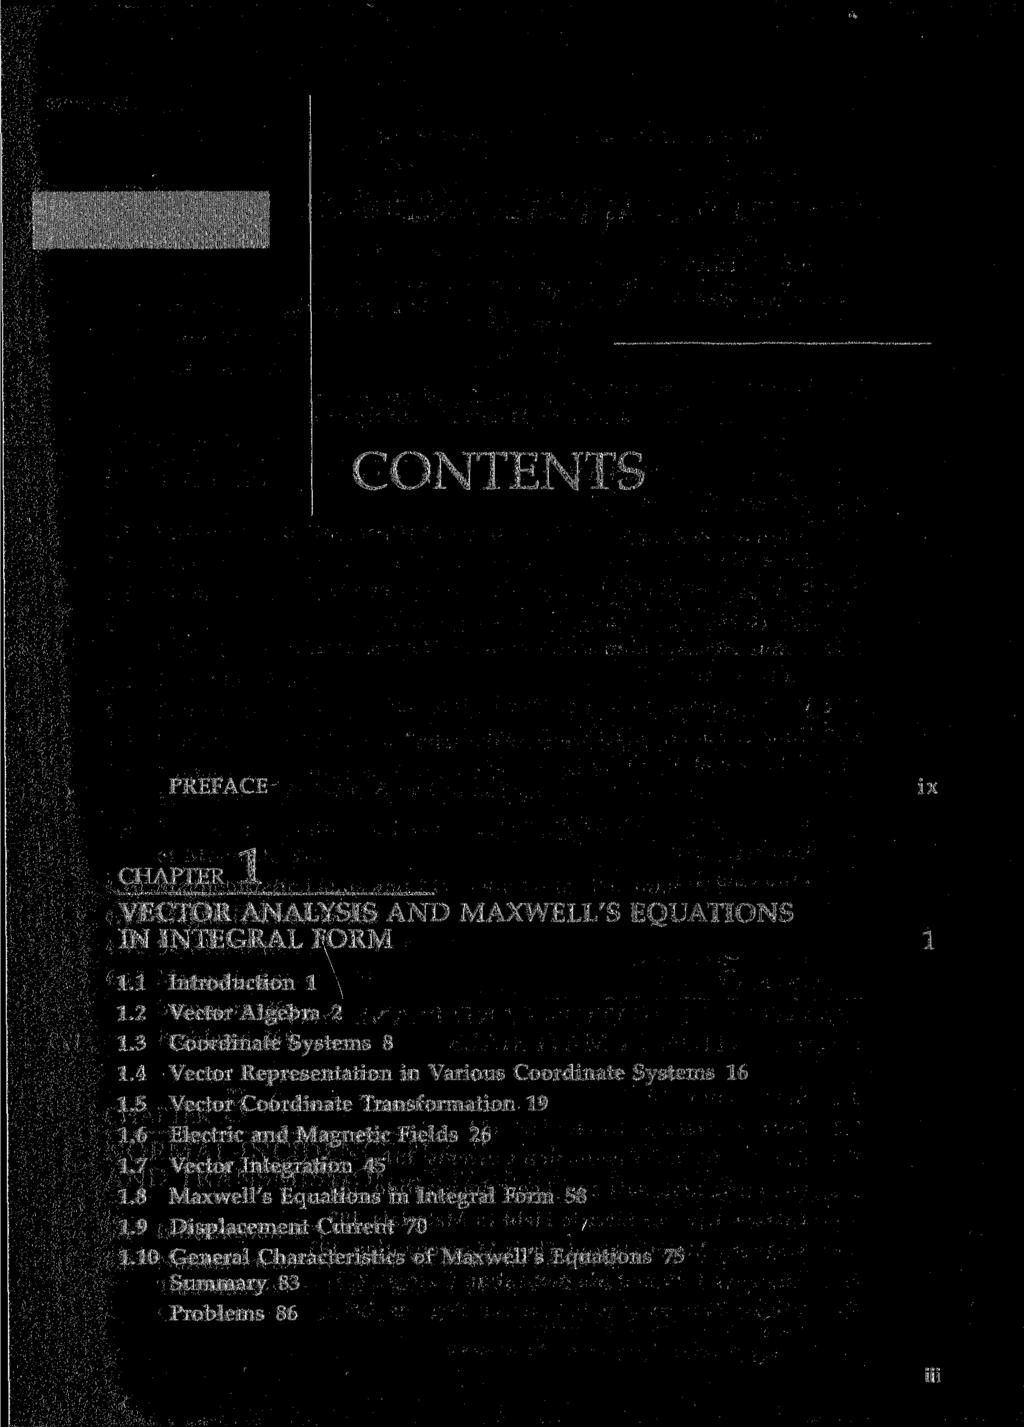 CONTENTS PREFACE VECTOR ANALYSIS AND MAXWELL'S EQUATIONS IN INTEGRAL FORM 1.1 Introduction 1 1.2 Vector Algebra 2 1.3 Coordinate Systems 8 1.4 Vector Representation in Various Coordinate Systems 16 1.